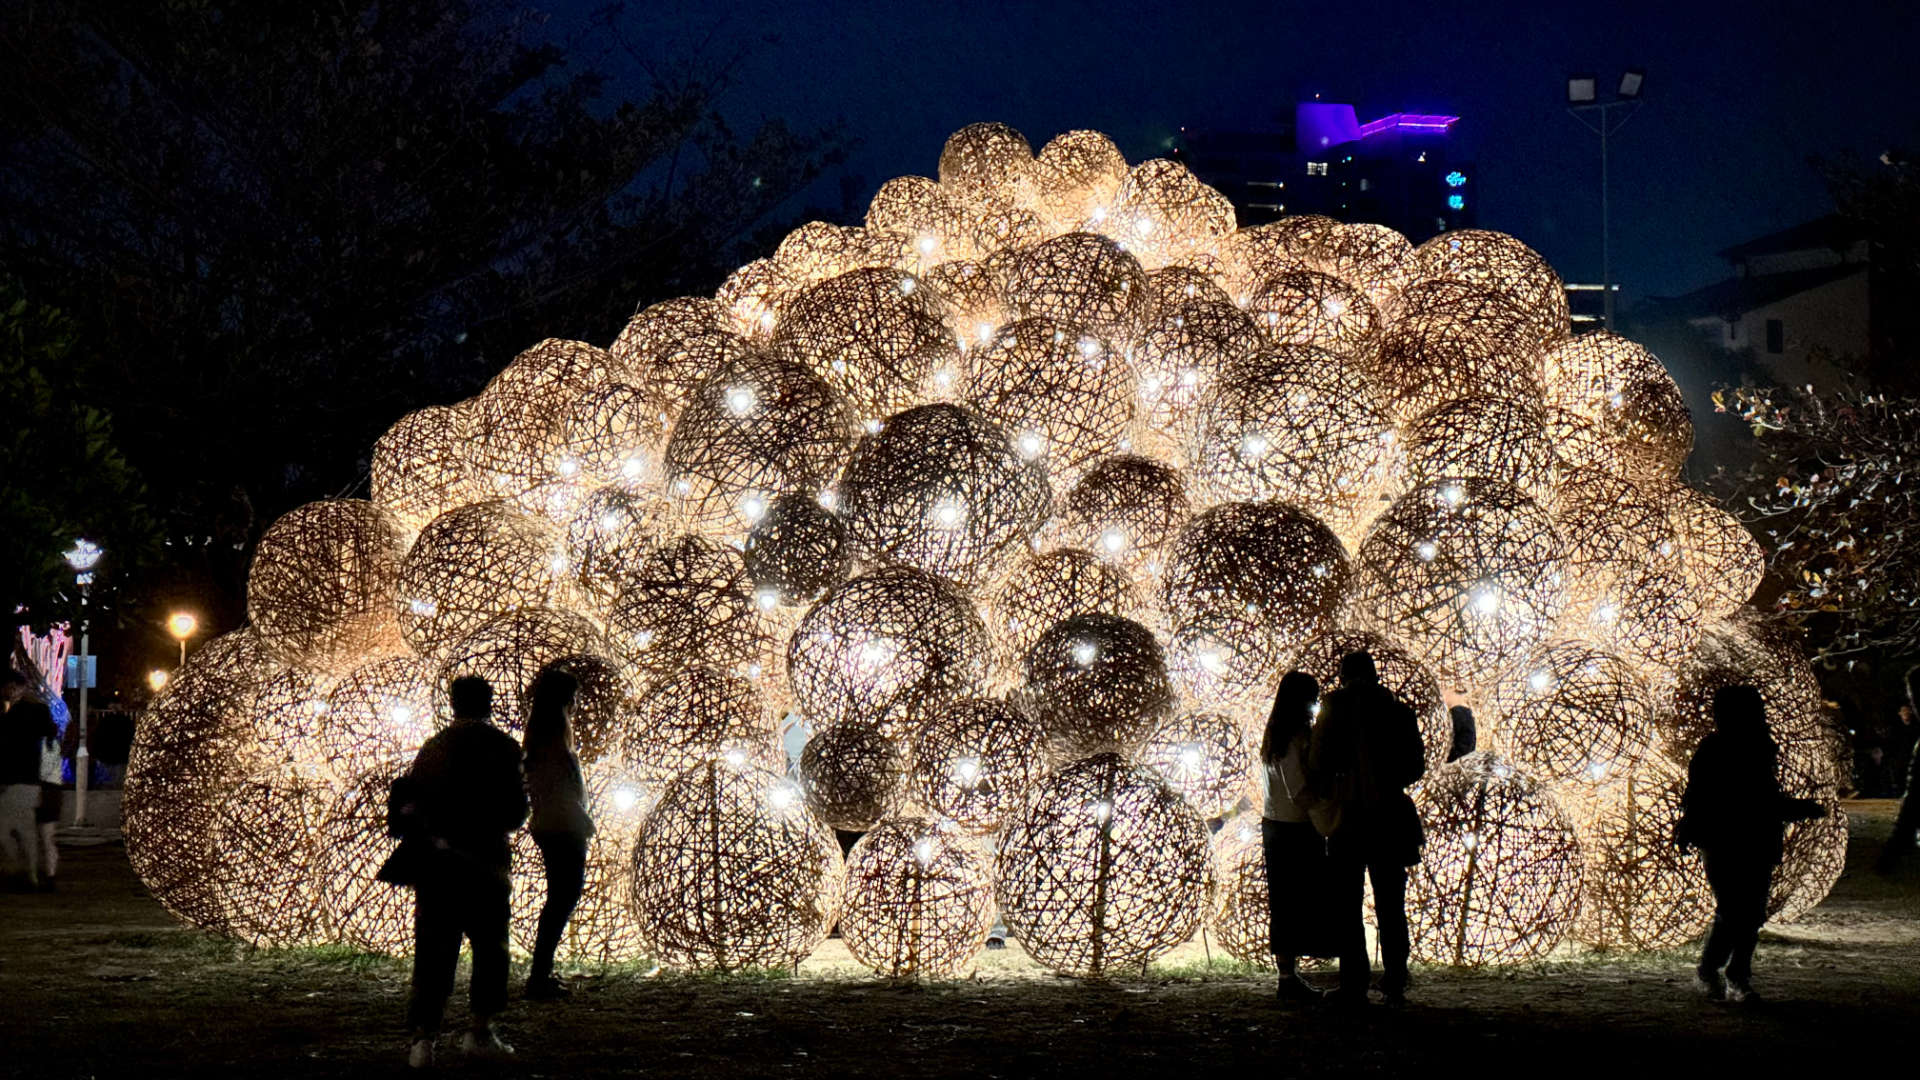 People are silhouetted in front of an illuminated sculpture made of dozens or hundreds of spheres. The spheres are made of curved wicker or some similar material.